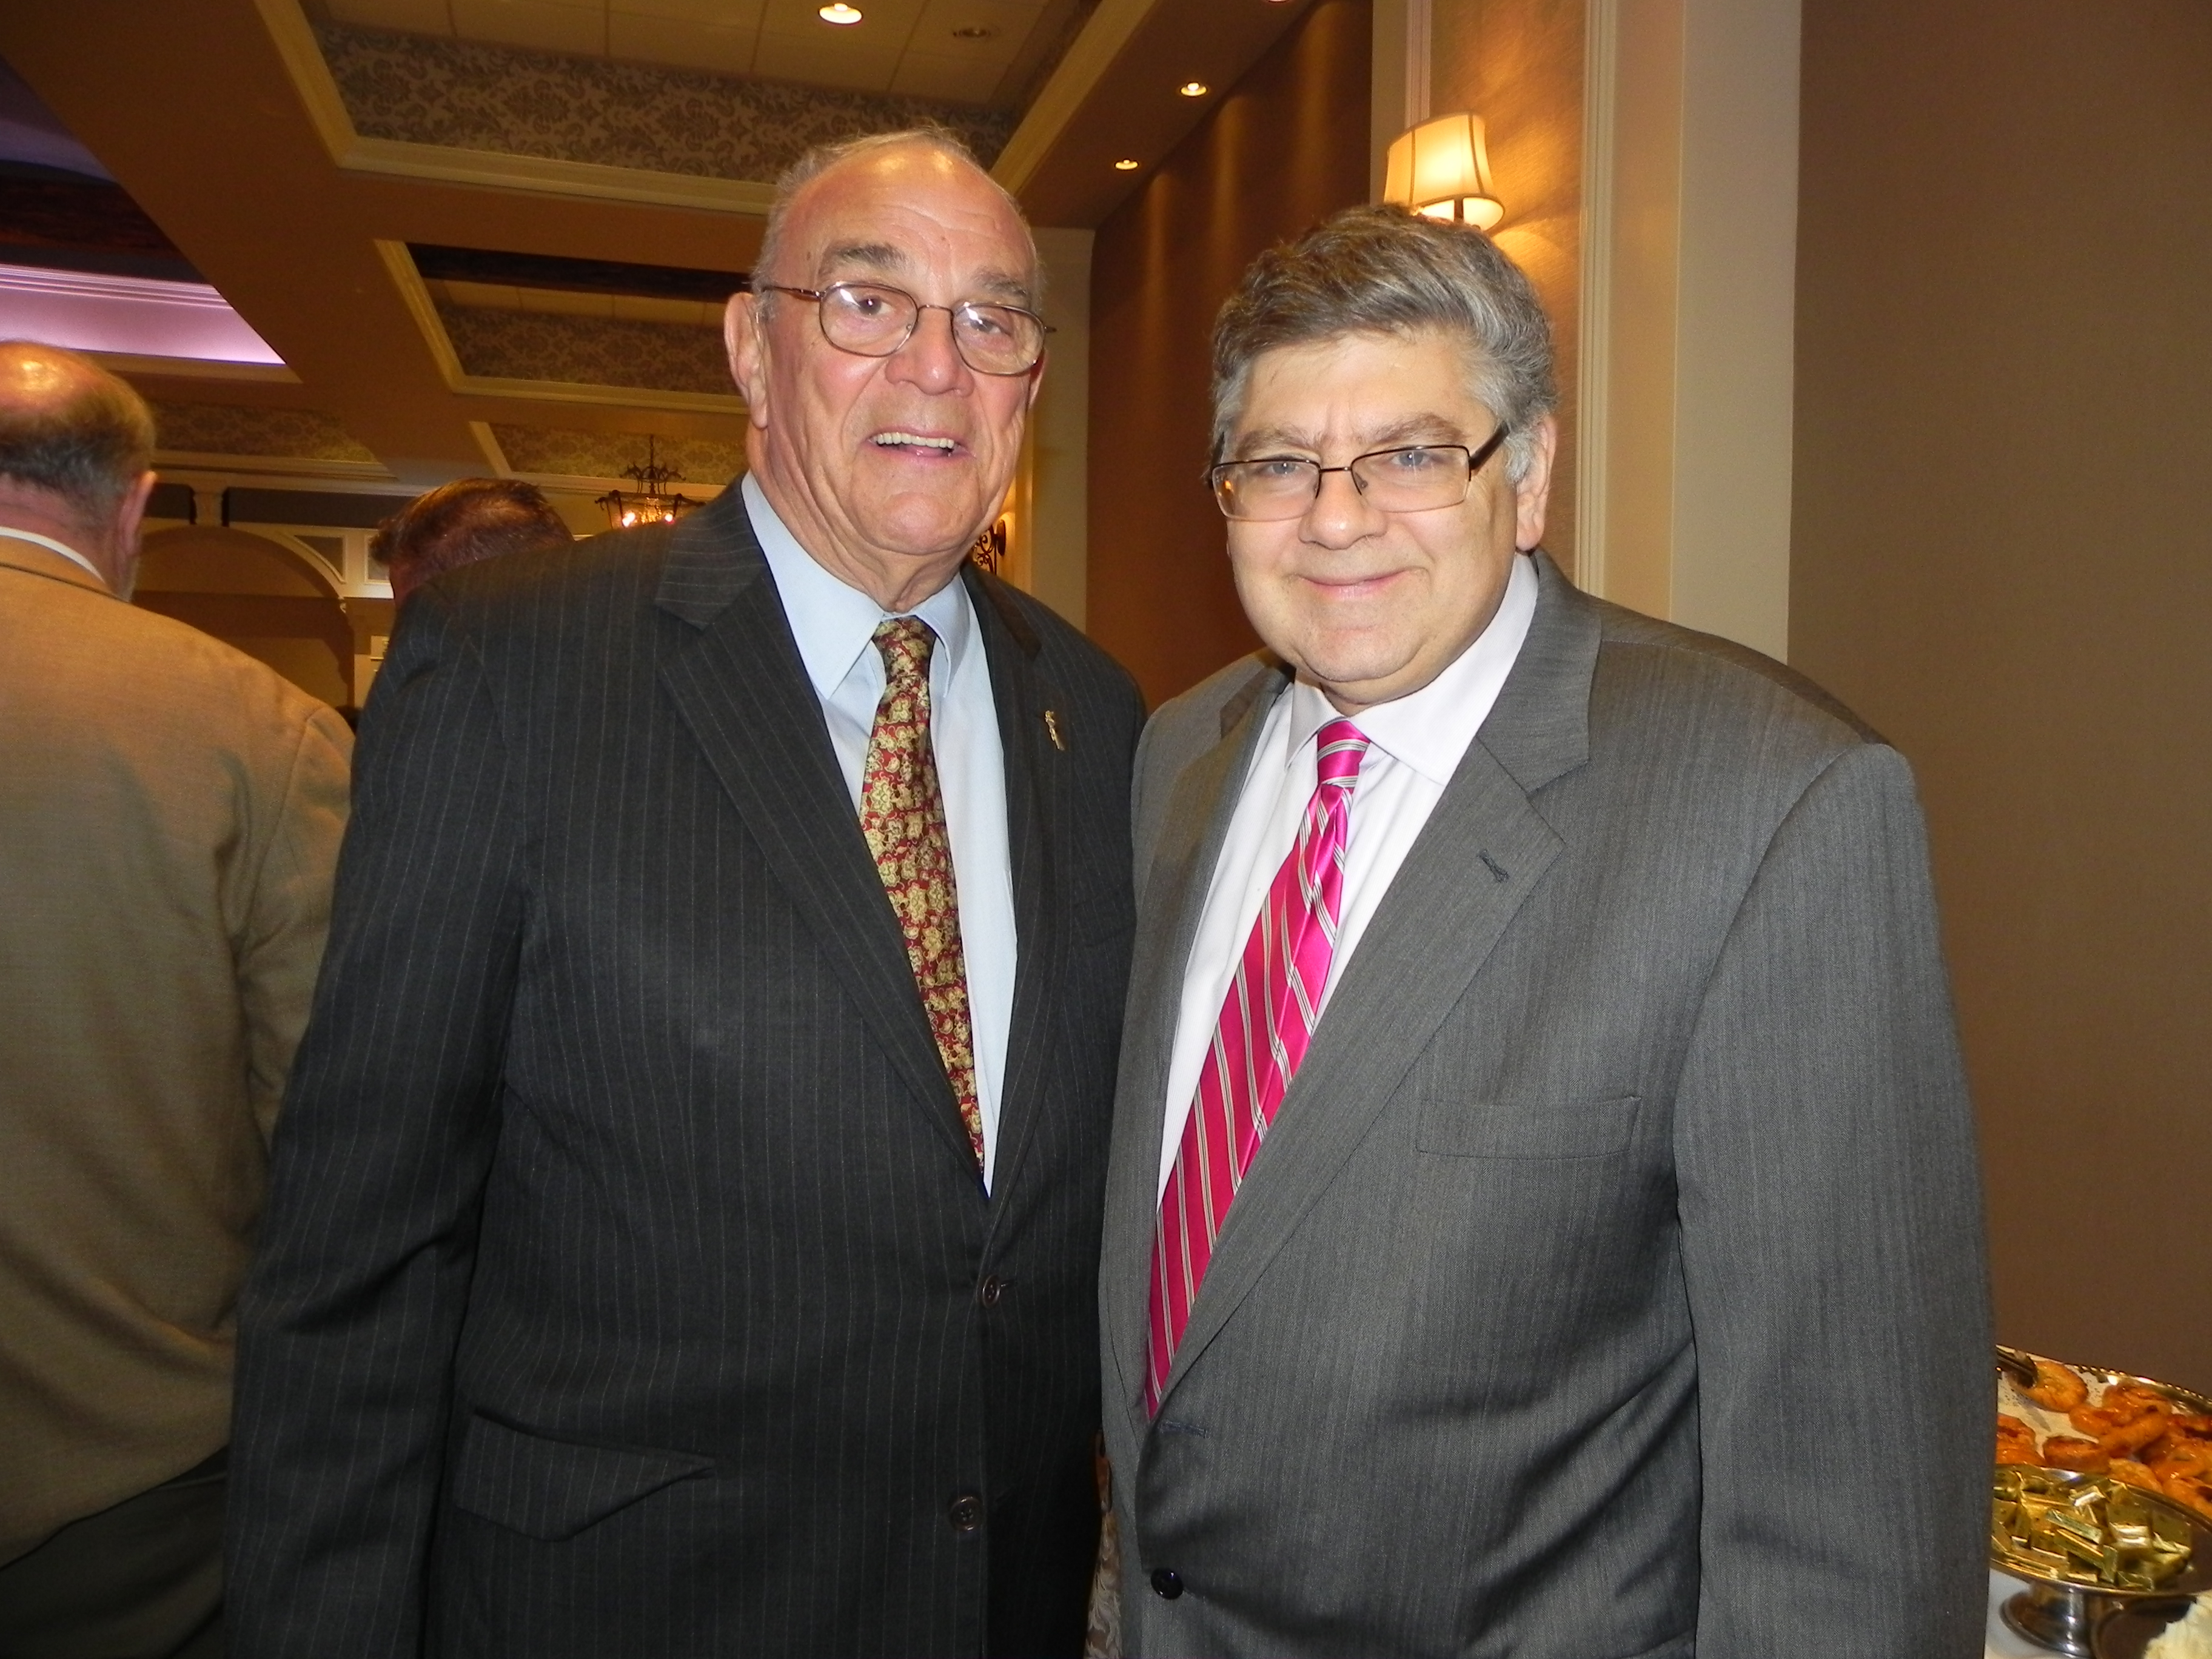 New York State Conservative Party Chairperson Mile Long (left), pictured with former Brooklyn Conservative Party head Jerry Kassar at a Bay Ridge event, says the pay raise for legislators is unfair to taxpayers. Eagle file photo by Paula Katinas